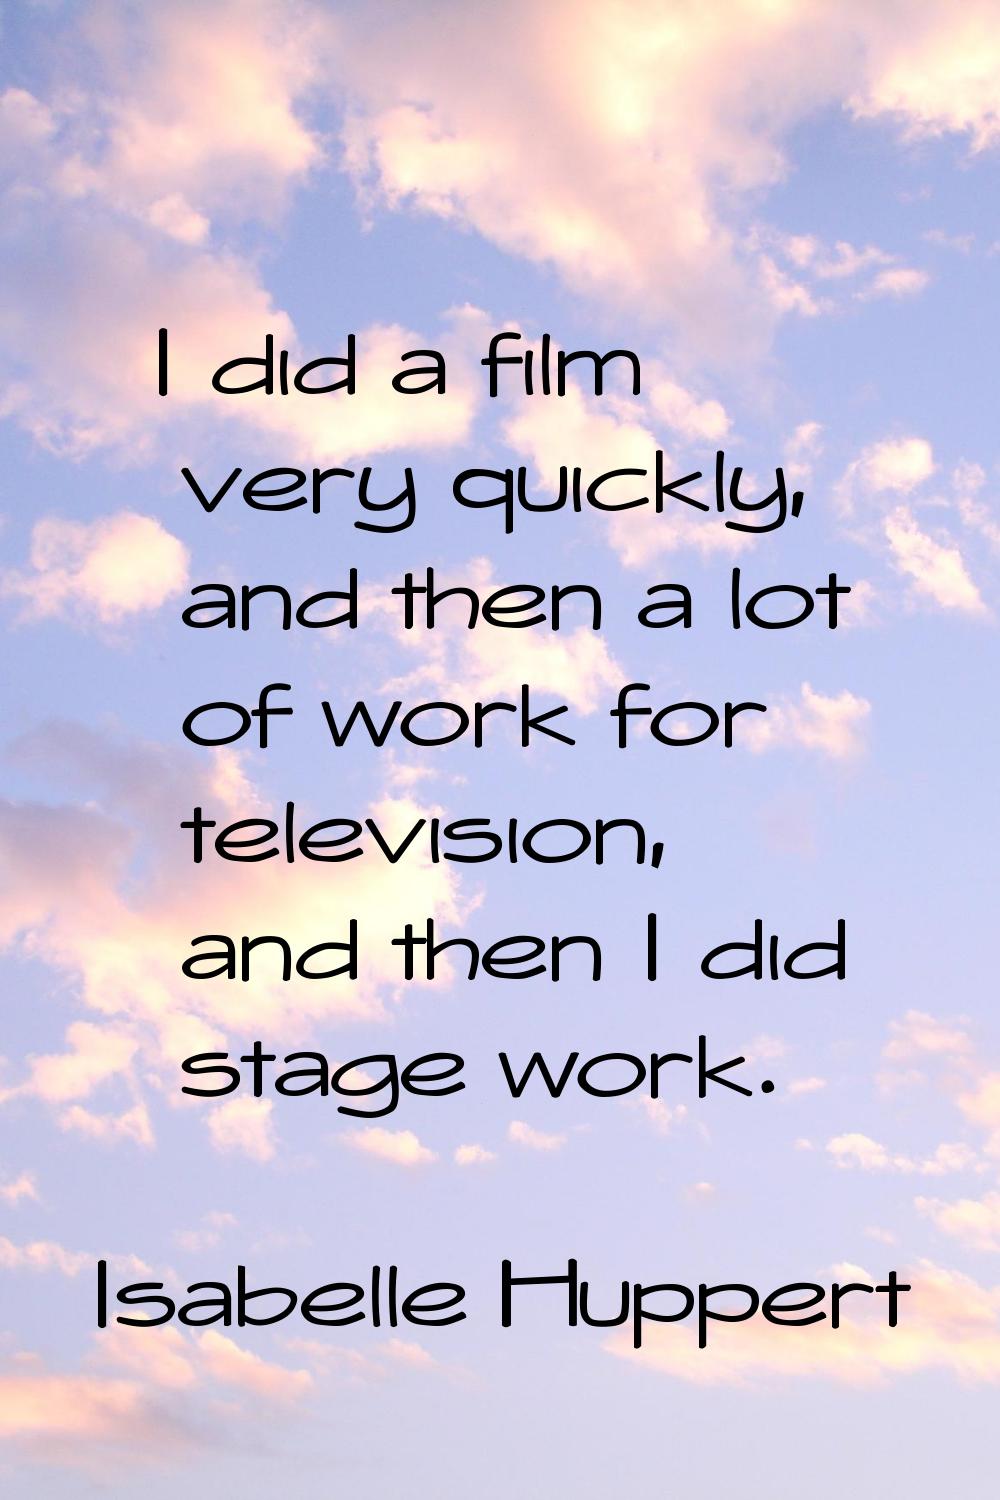 I did a film very quickly, and then a lot of work for television, and then I did stage work.